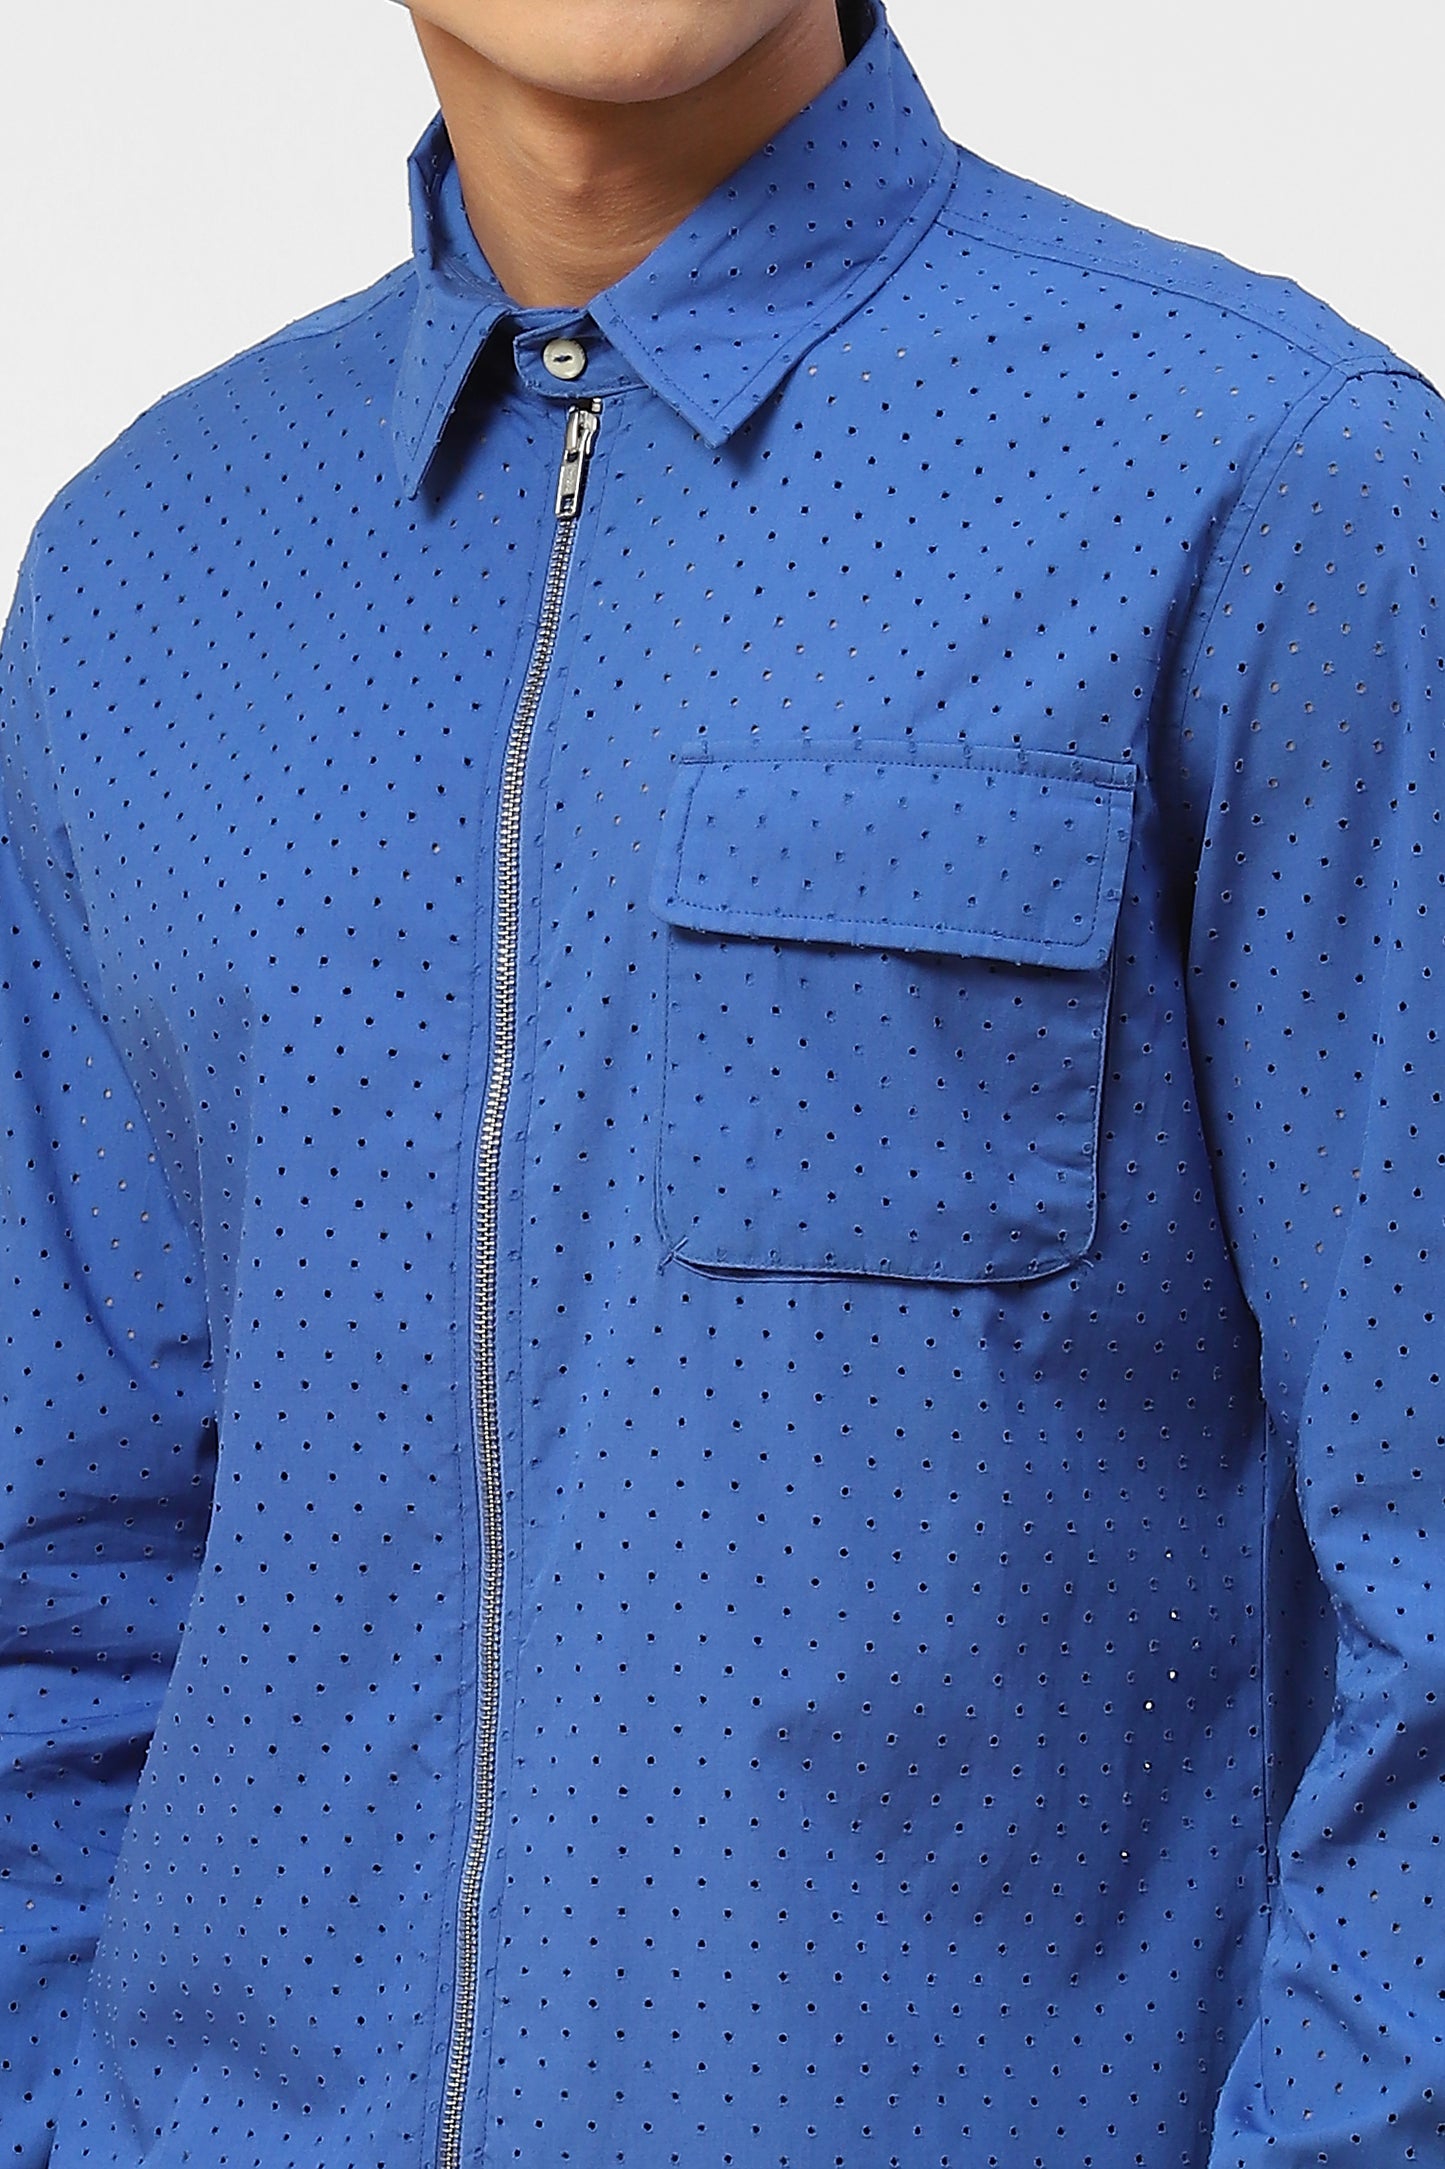 Full Sleeves Perforated Mens Shirt with zipper